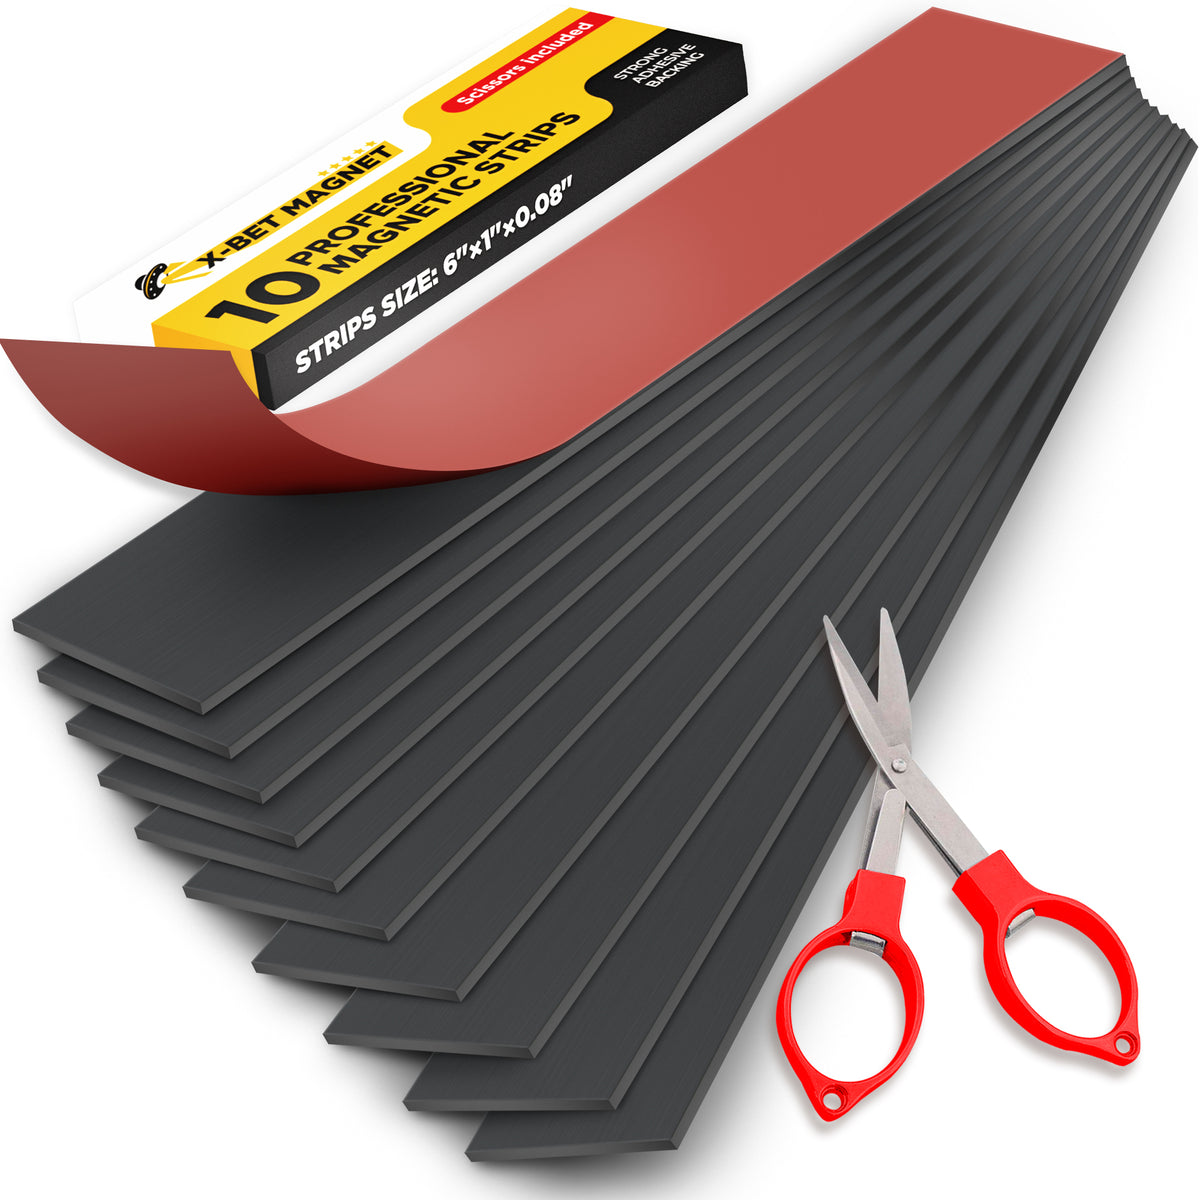 Wintex Sticky Magnetic Strips with Adhesive Backing 20 x 20 x 2 mm Magnet Sheet, Size: 0.8, Black